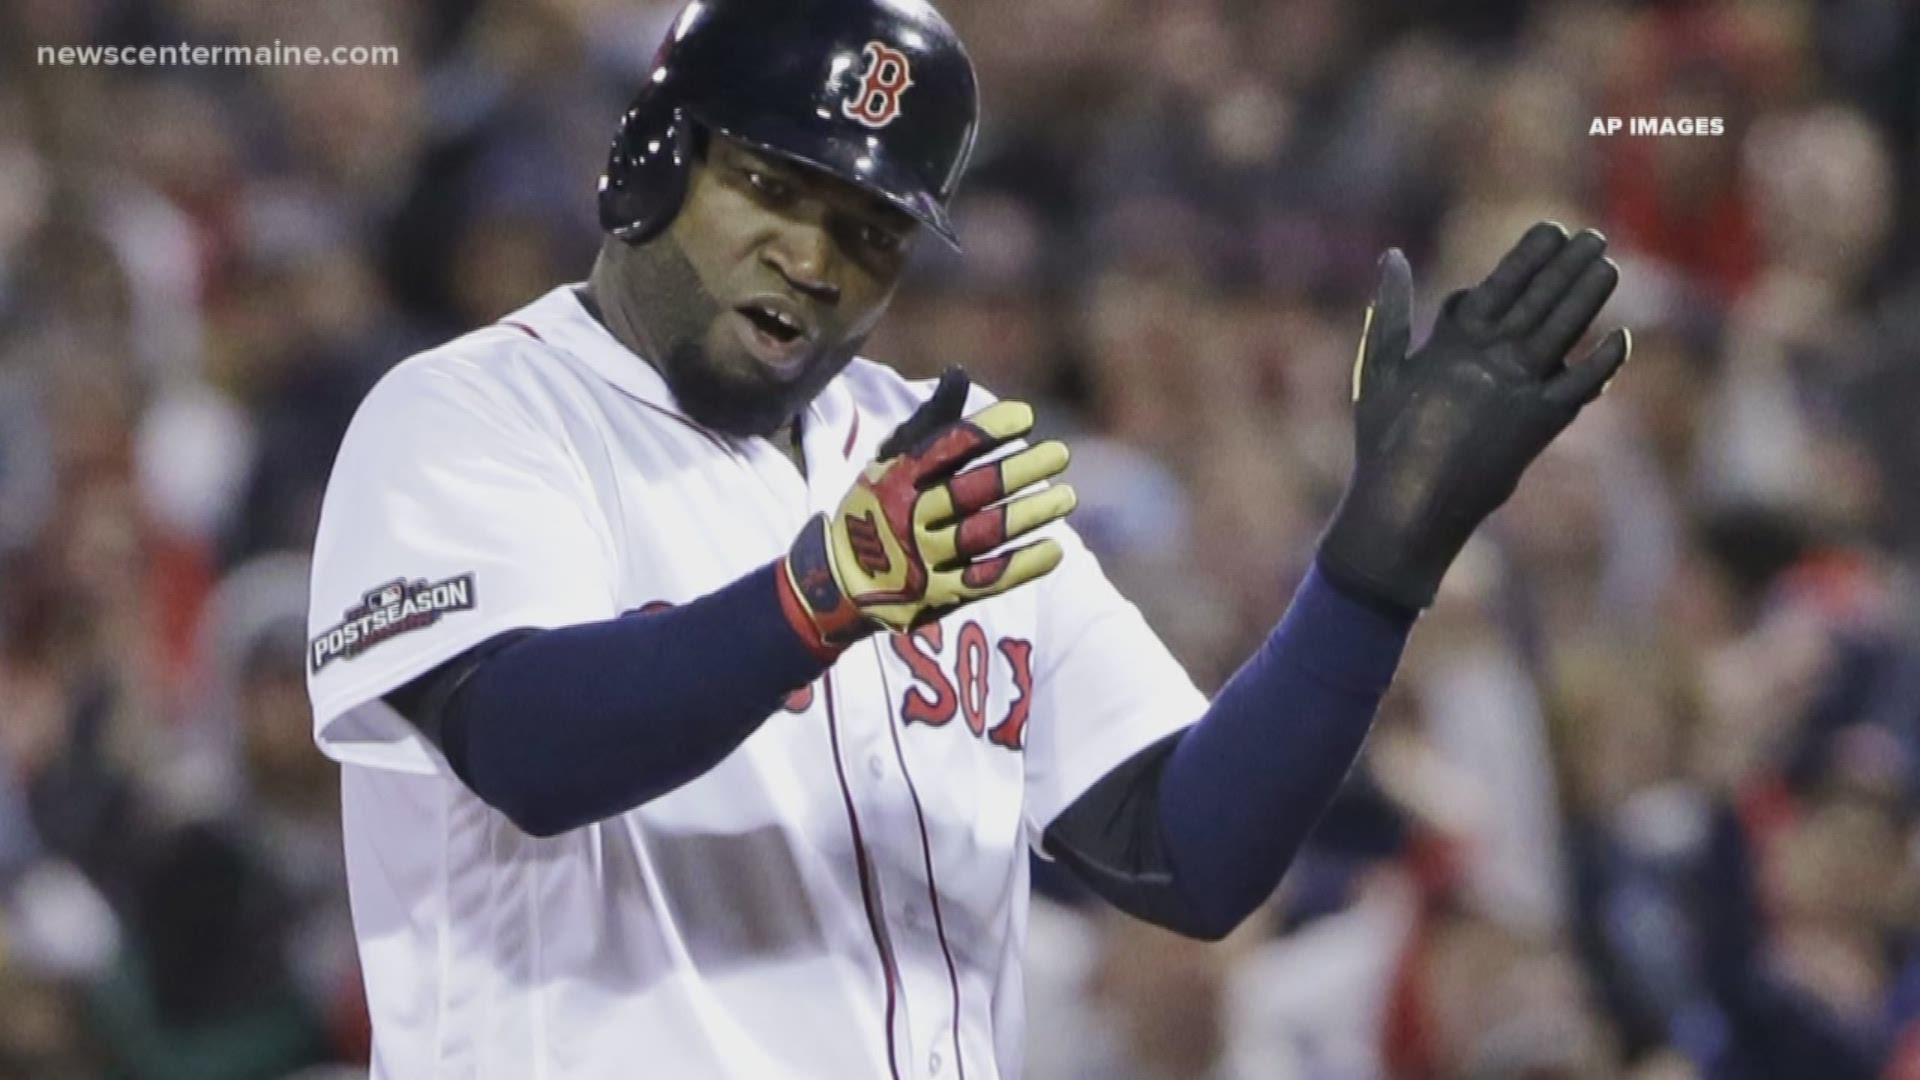 According to reports out of the Dominican Republic, former Red Sox slugger David Ortiz was shot and wounded Sunday evening.